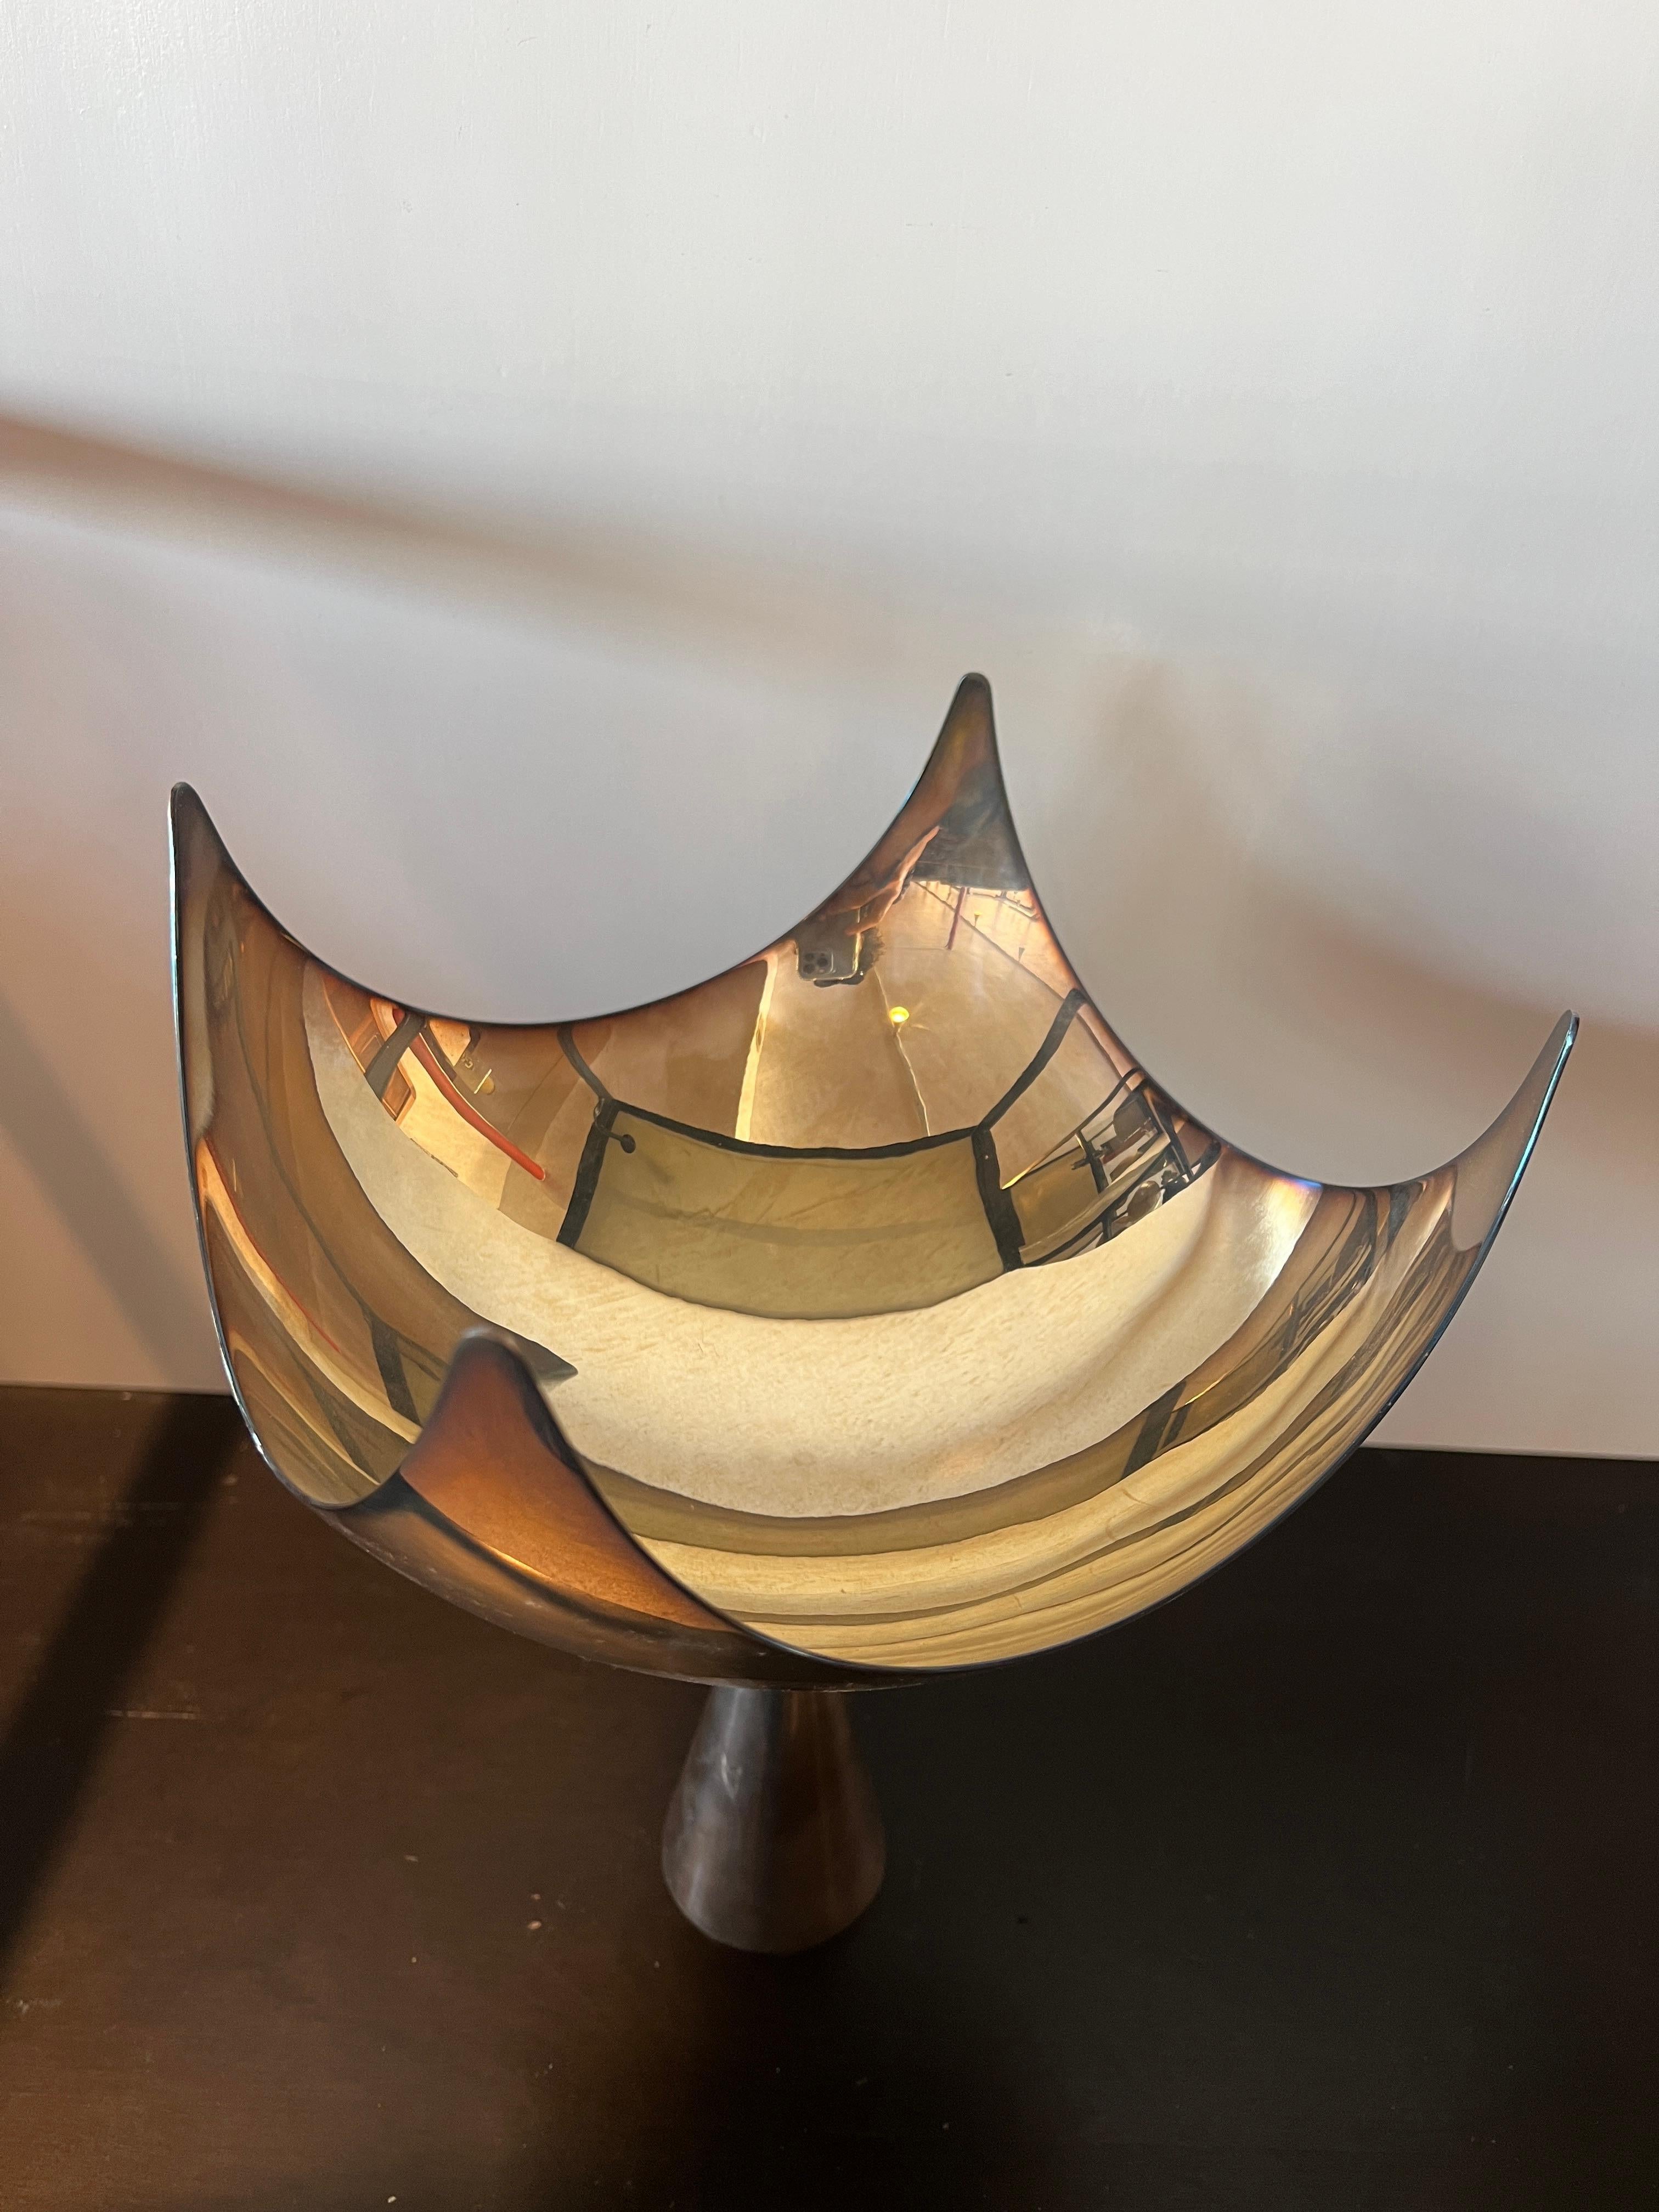 American Mesa 1970s Silver Stemmed Bowl Sculpture For Sale